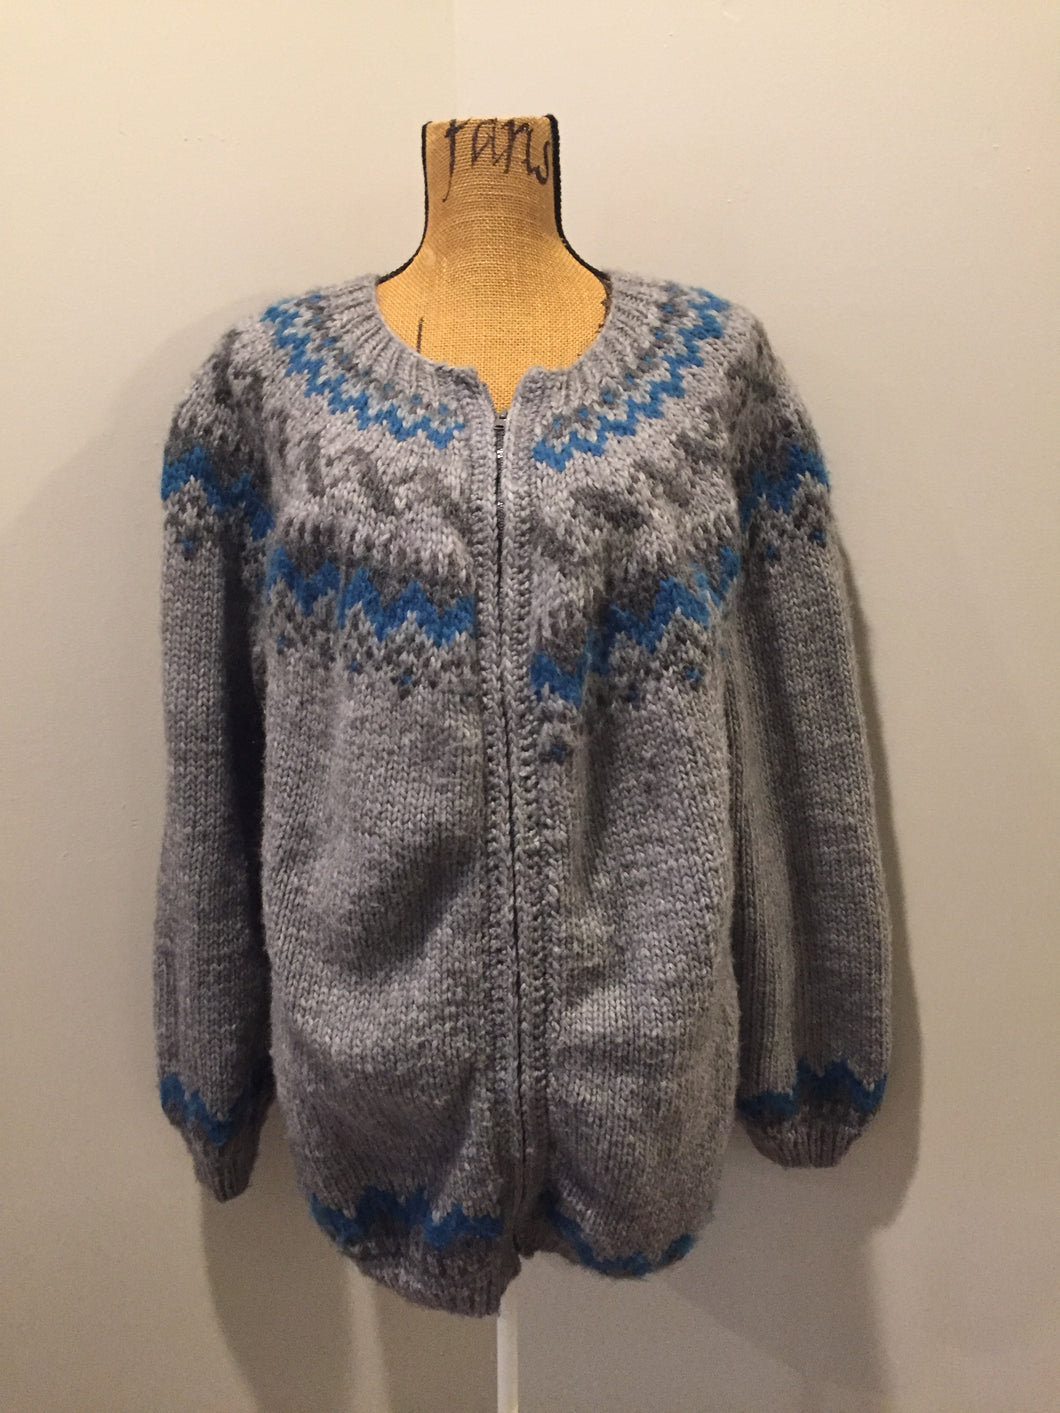 Kingspier Vintage - Hand knit Lopi style cardigan in grey and blue design with zipper. Made with synthetic fibres. Size large.